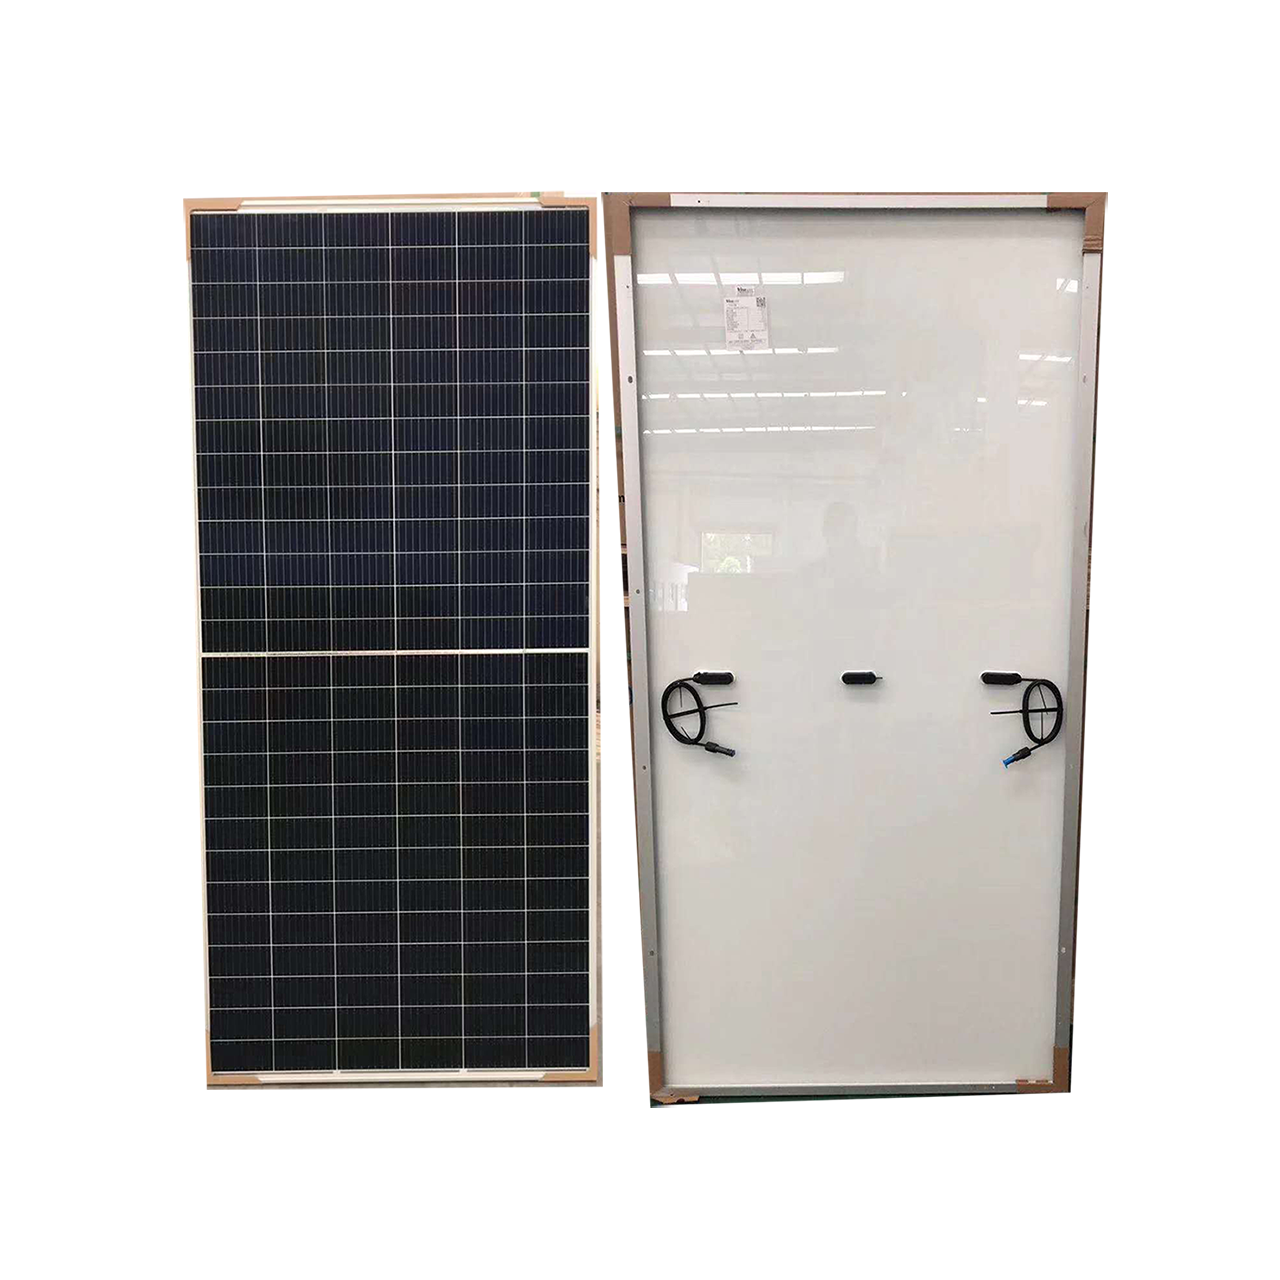 China factory high quality 345W  72 Cells Monocrystalline solar panels  solar energy related products